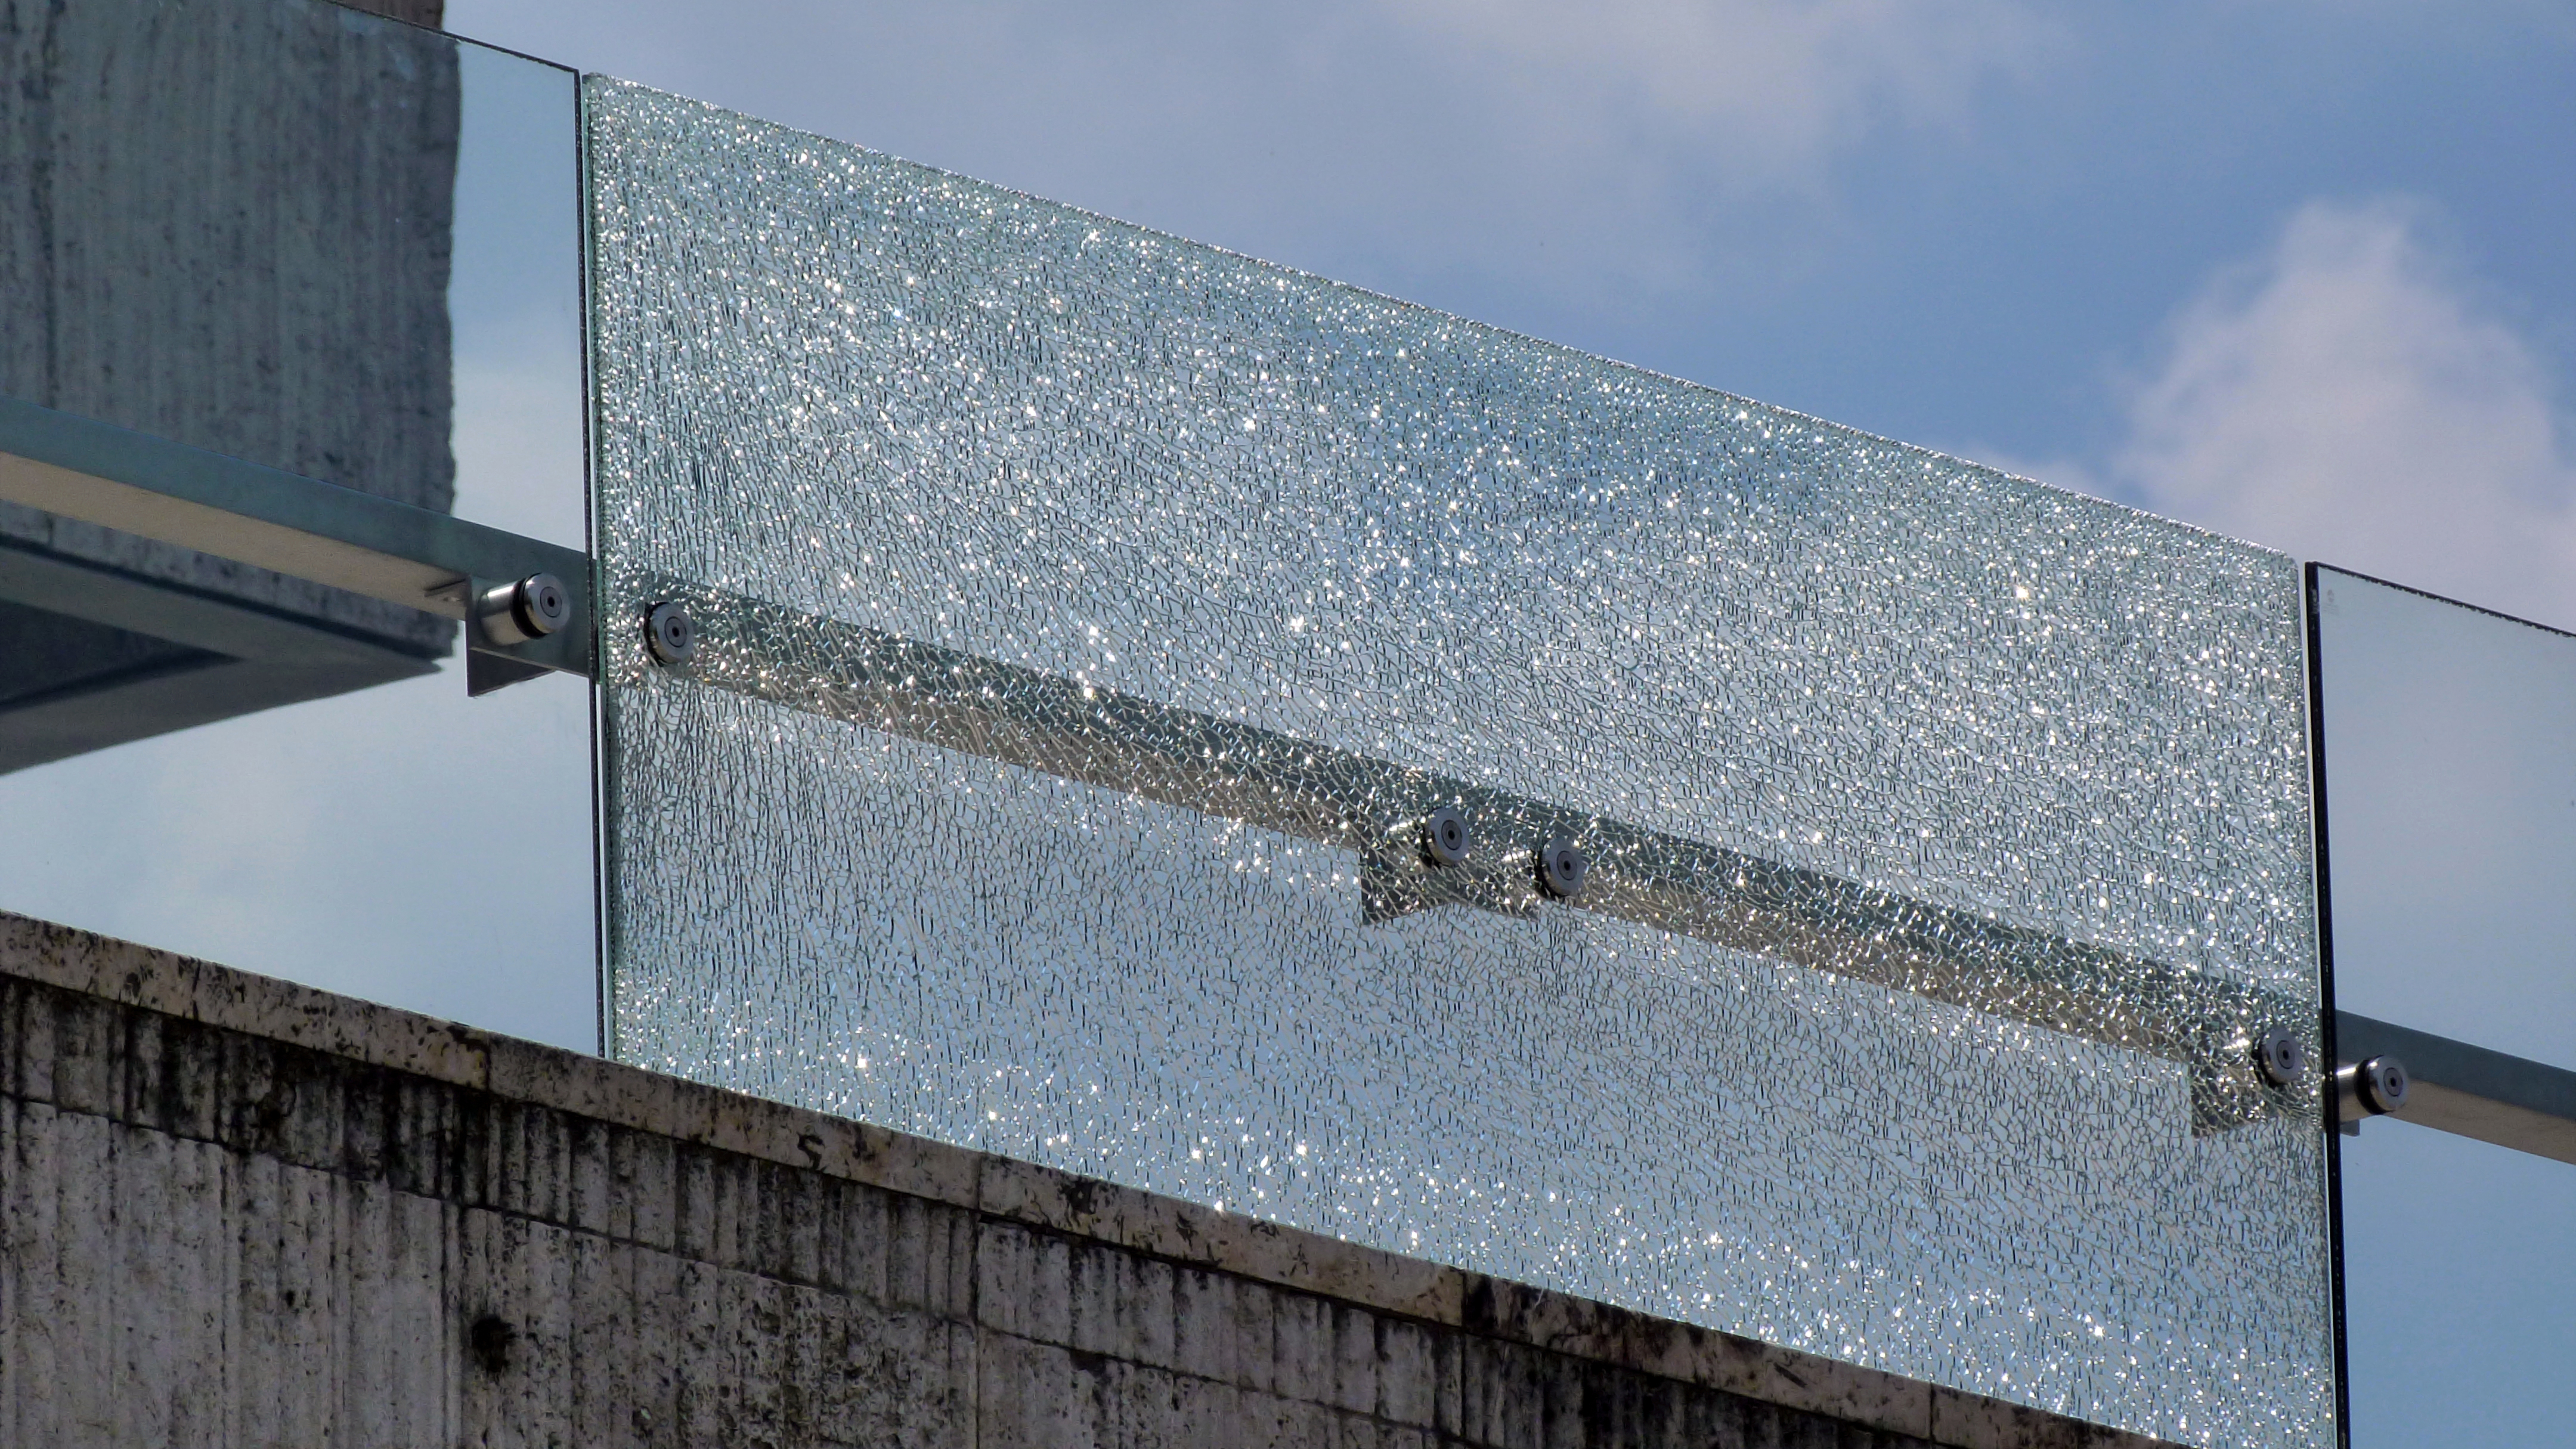 Shattered glass railing or balustrade & stone panel under blue sky with white clouds. broken laminated tempered safety glass. construction and building industry concept. stainless steel glass brackets; Shutterstock ID 1474343846; purchase_order: NA; job: RICS Property Journal April 22; client: RICS; other: 